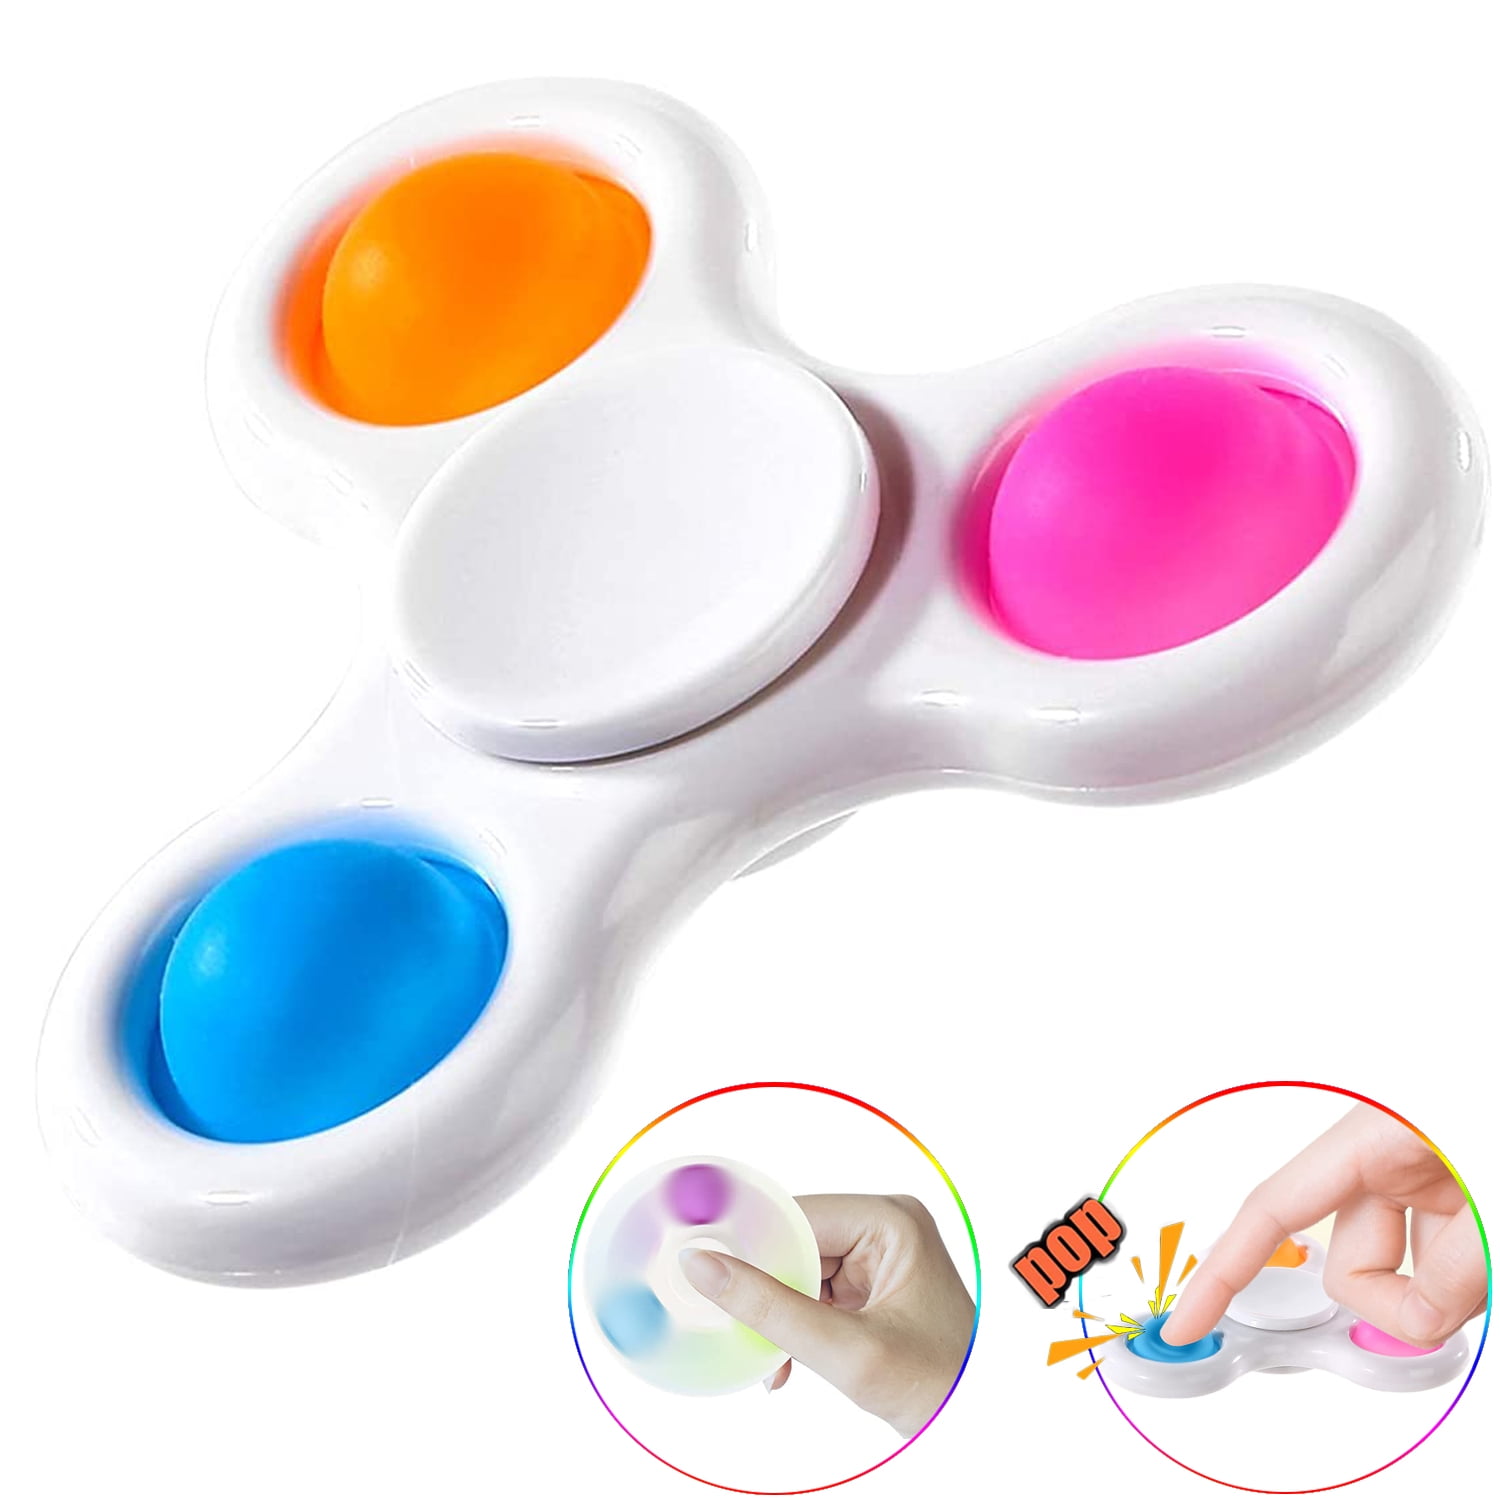 Push Popper Fidget Spinner Simple Dimple Toy Anxiety Stress Relief Sensory ASD 